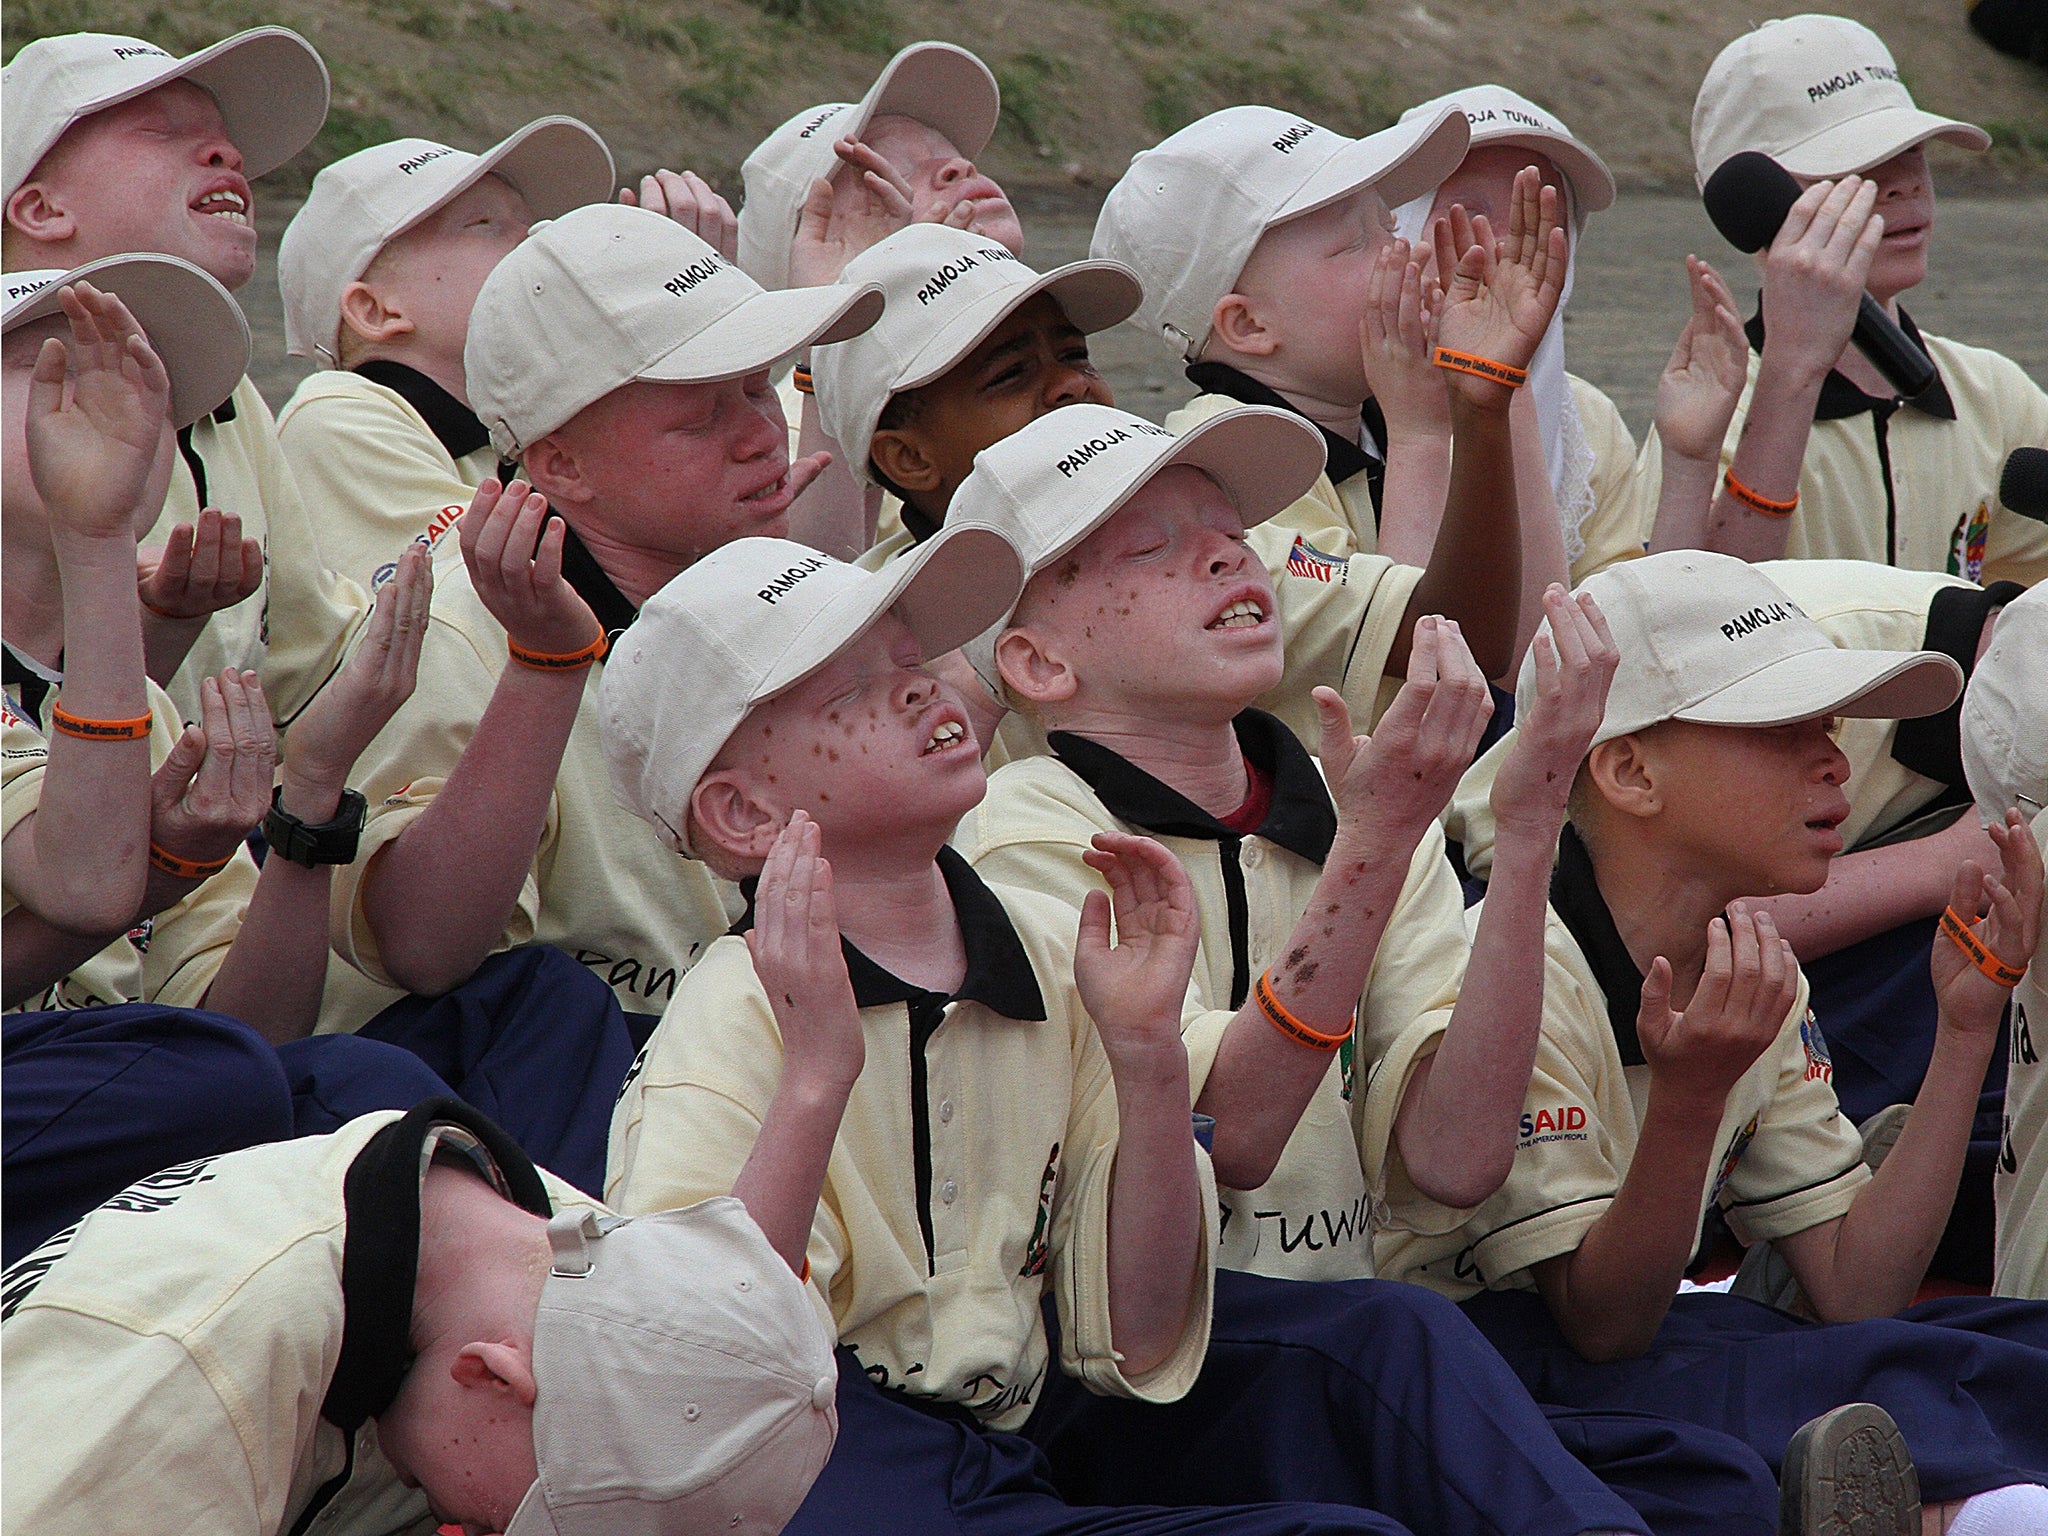 Young children with albinism in Tanzania (file photo)